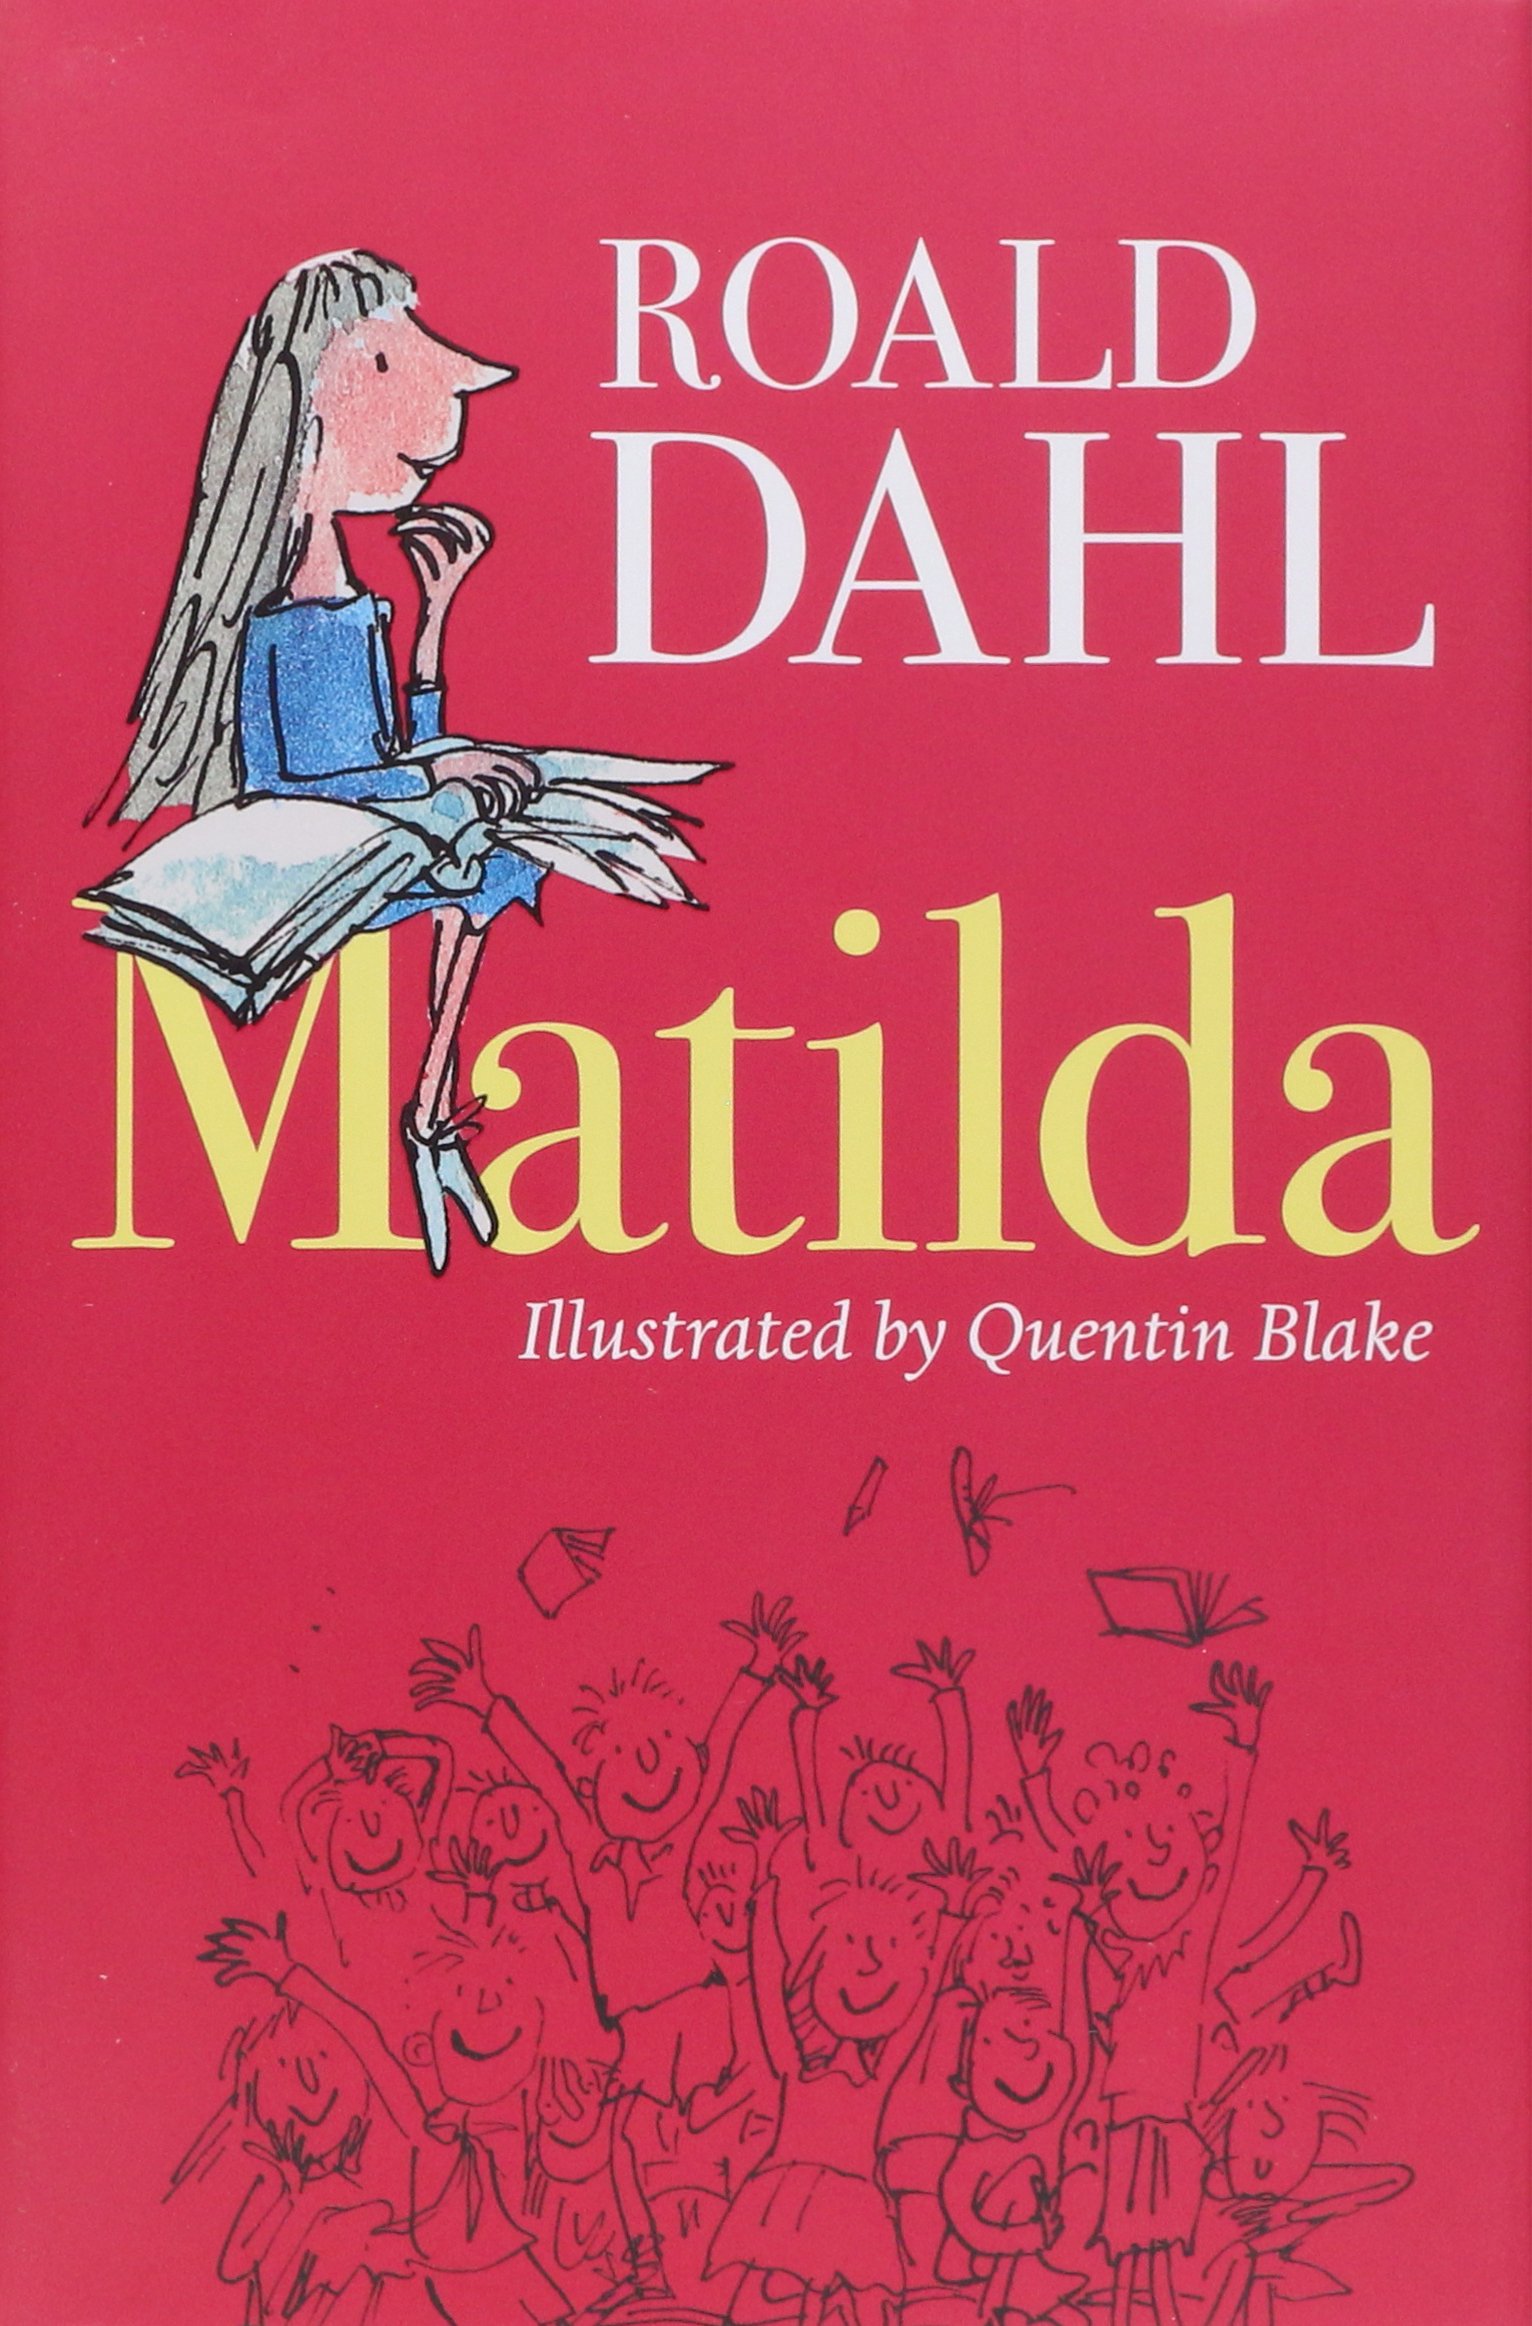 Image result for image of matilda by roald dahl red cover